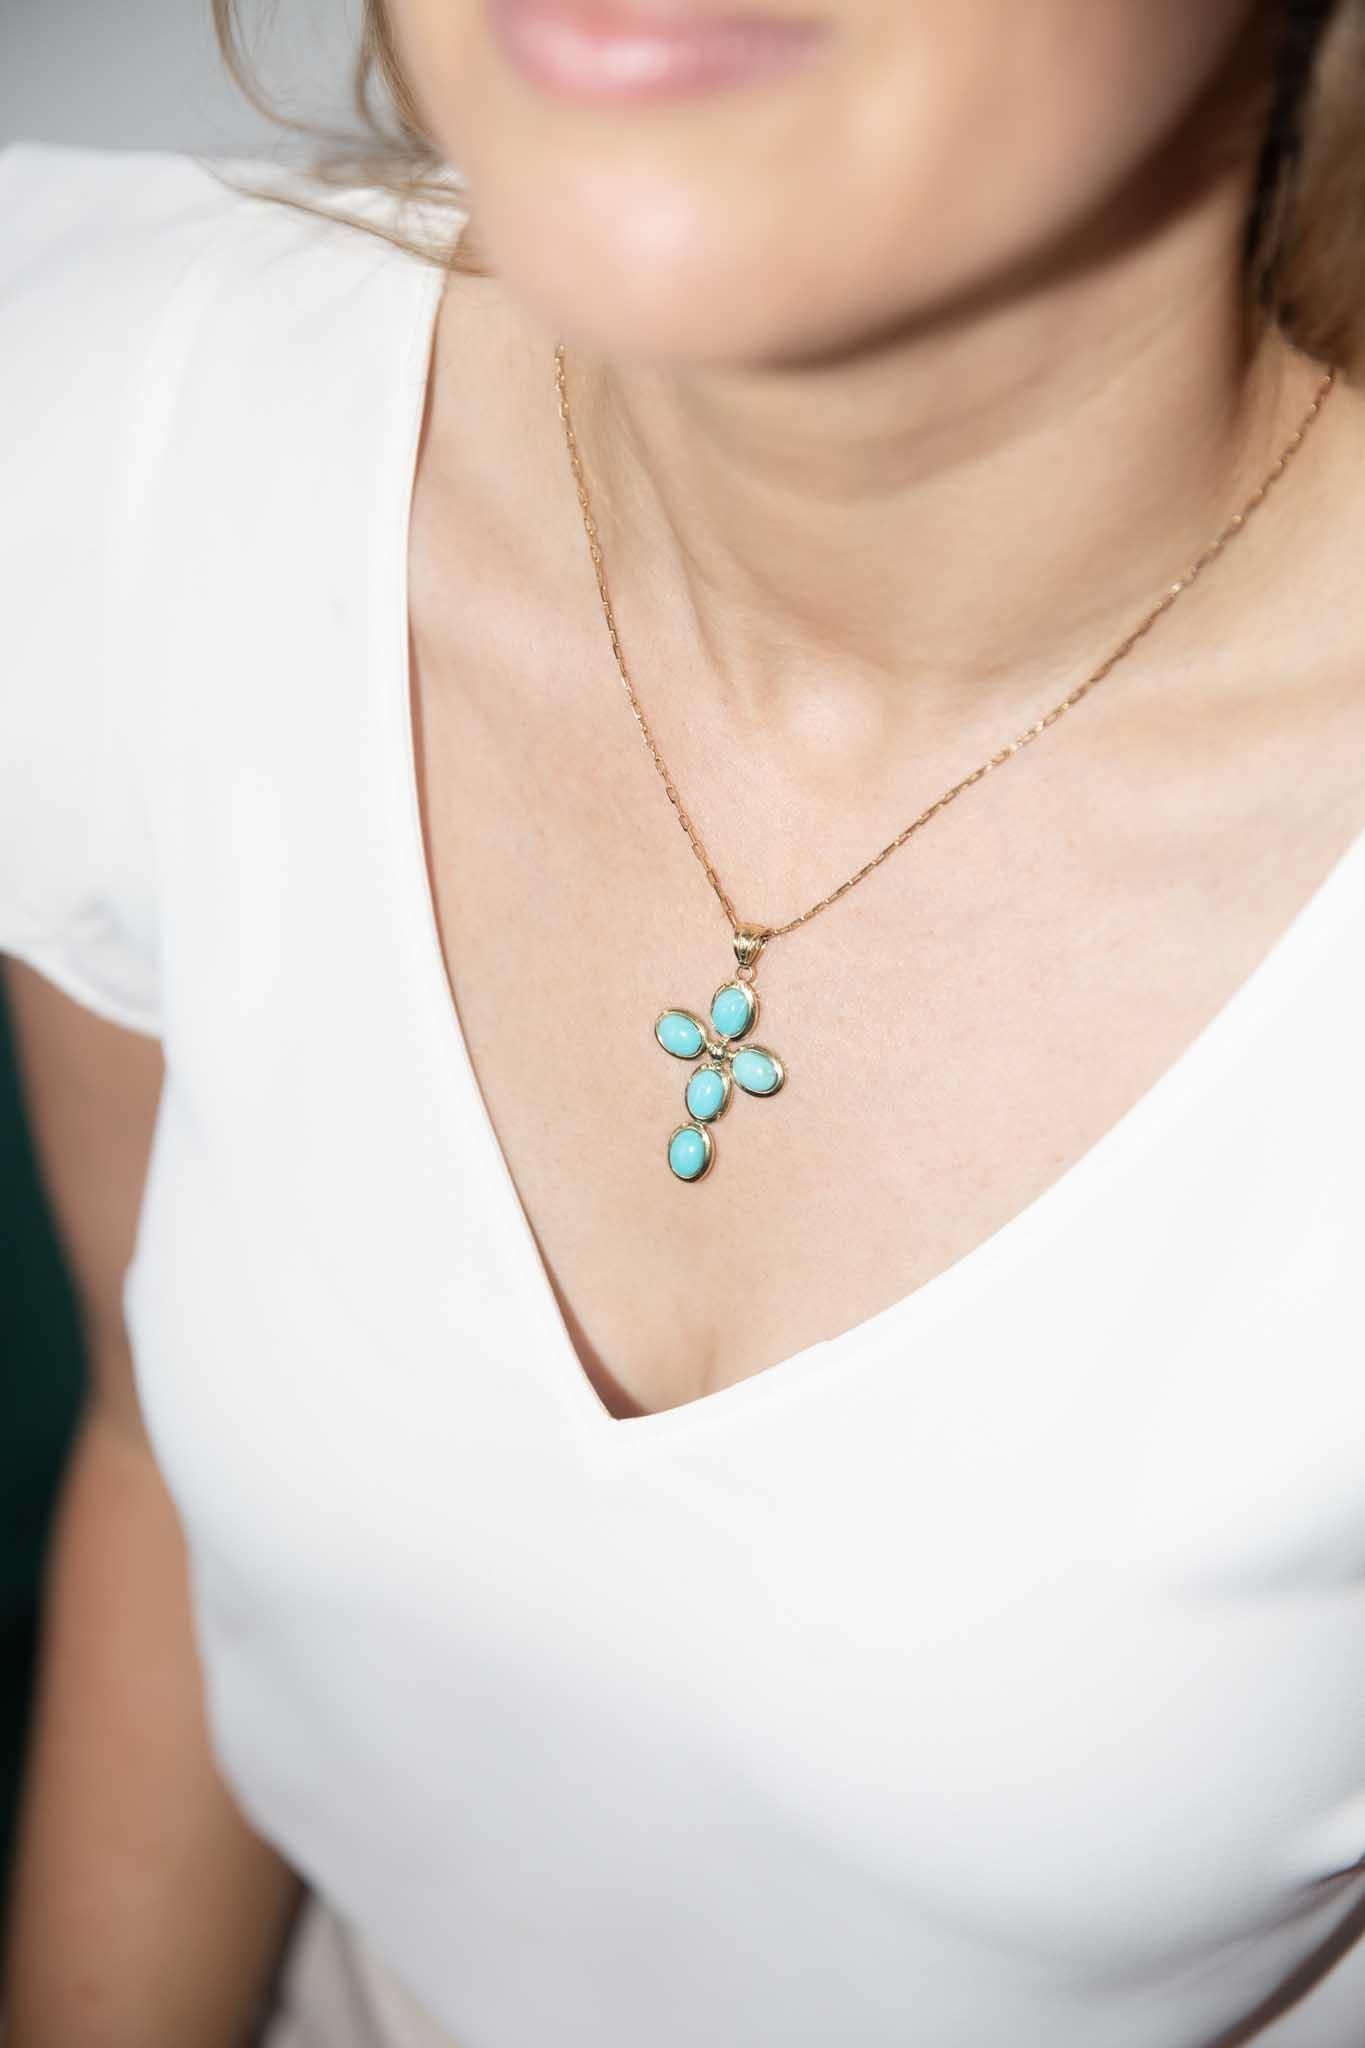 Crafted in 14 carat gold, The Genevieve Pendant & Chain is a vibrant jewel Her stunning blue turquoise gems imagine the rich seas of the Maldives with the sun dancing upon it's surface. She is the perfect gift for someone special.

The Genevieve